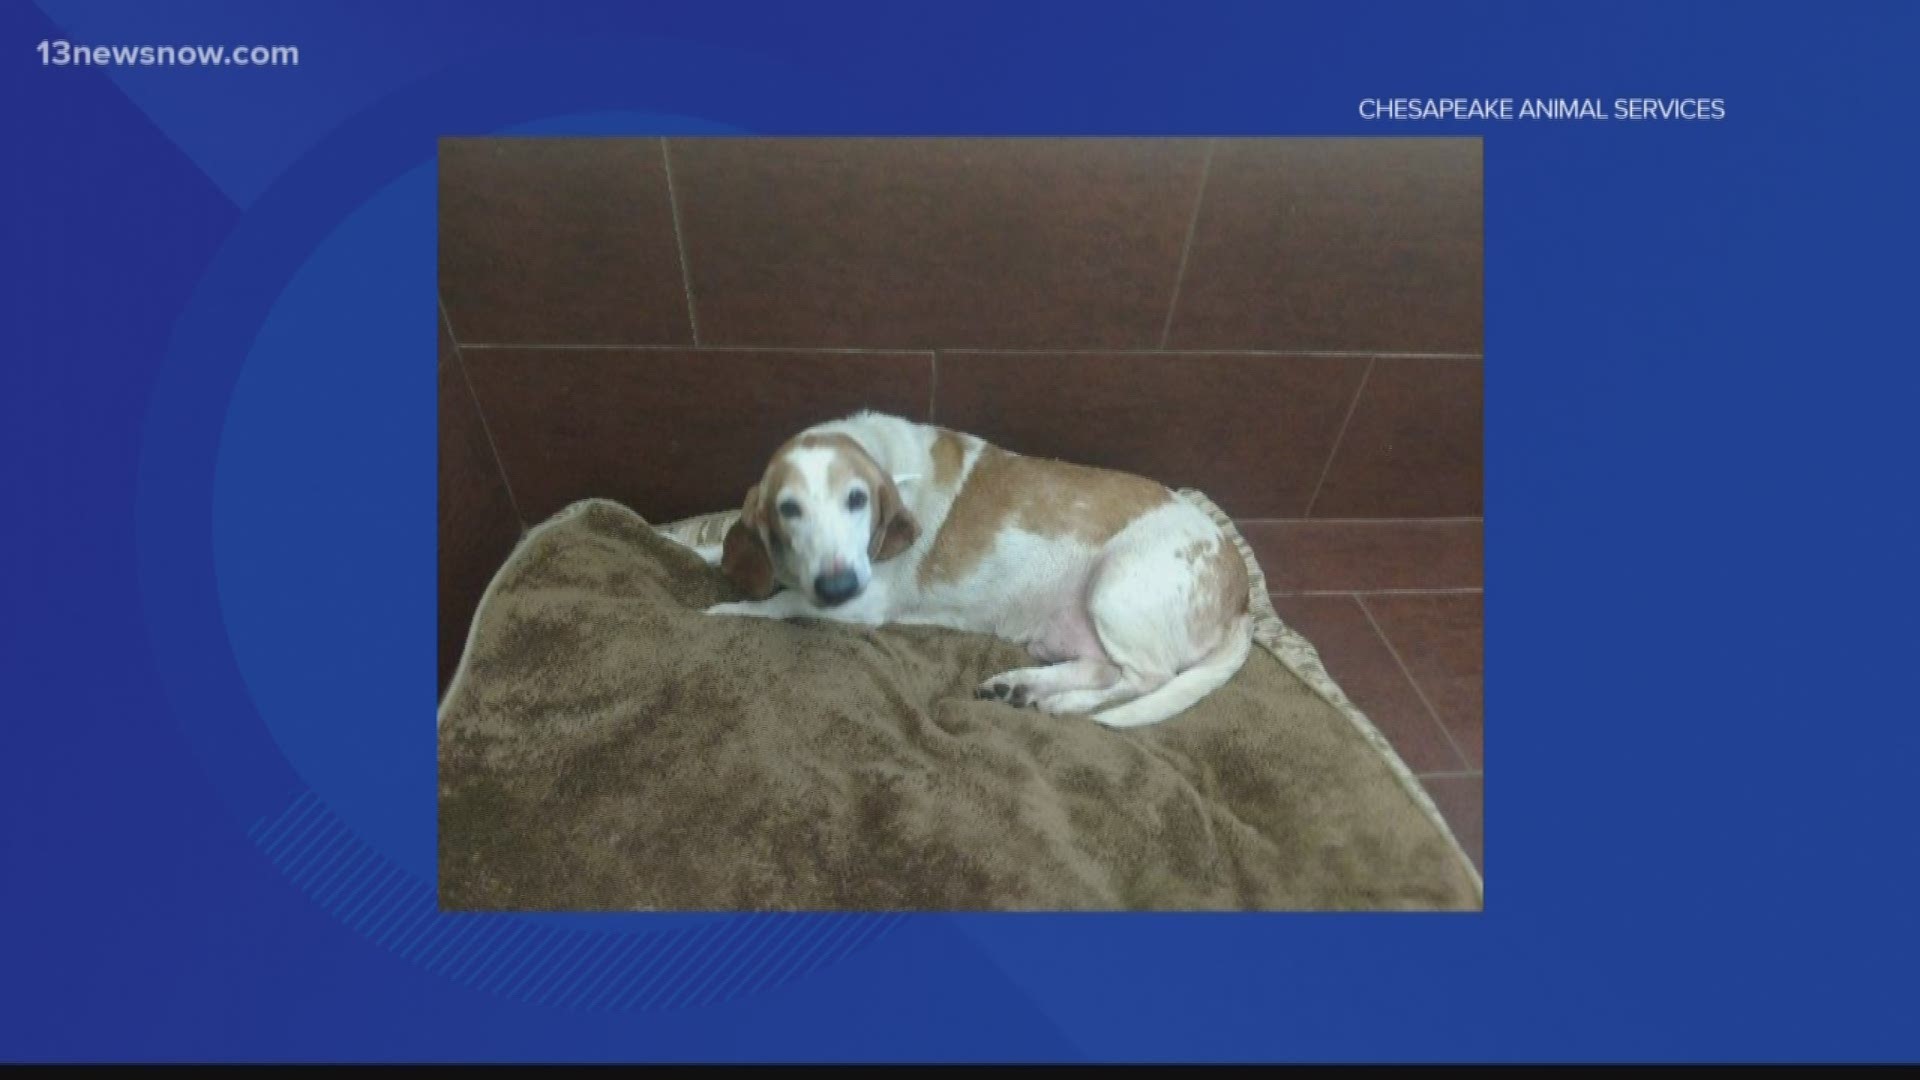 Dozens of basset hounds seized from Chesapeake home